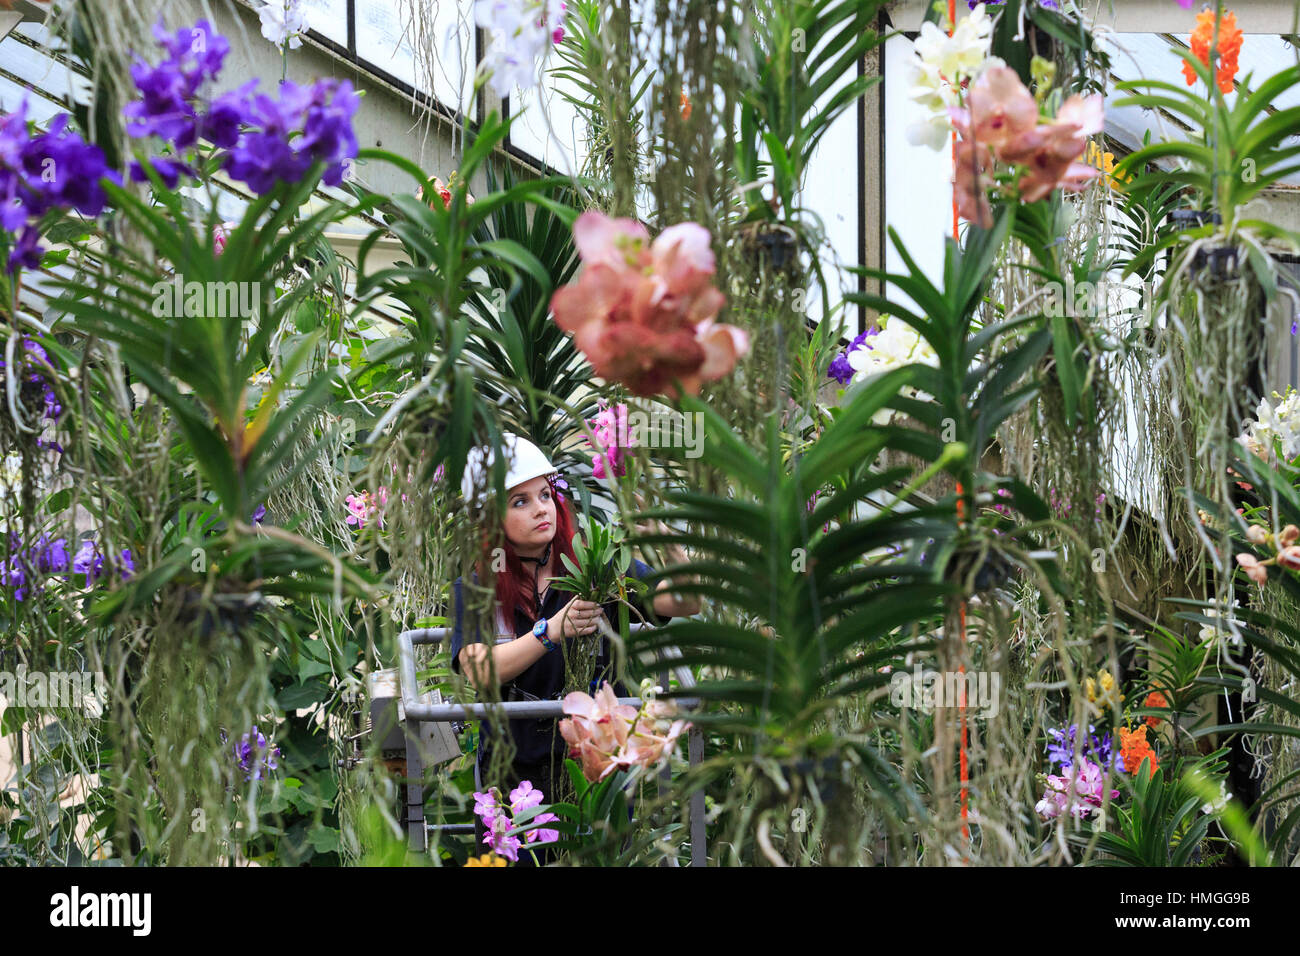 London, UK. 2 February 2017. Elisa Biondi, Princess of Wales Conservatory Manager and Festival creator with vanda orchids. Press preview of the Kew Gardens 2017 Orchids Festival which opens to the public on Saturday, 4 February in the Princess of Wales Conservatory. The 22nd annual Kew Orchid Festival is a colourful celebration of India's vibrant plants and culture. It took Kew staff and volunteers 1,600 hours to create. 3,600 orchids are on display until 5 March 2017. Stock Photo